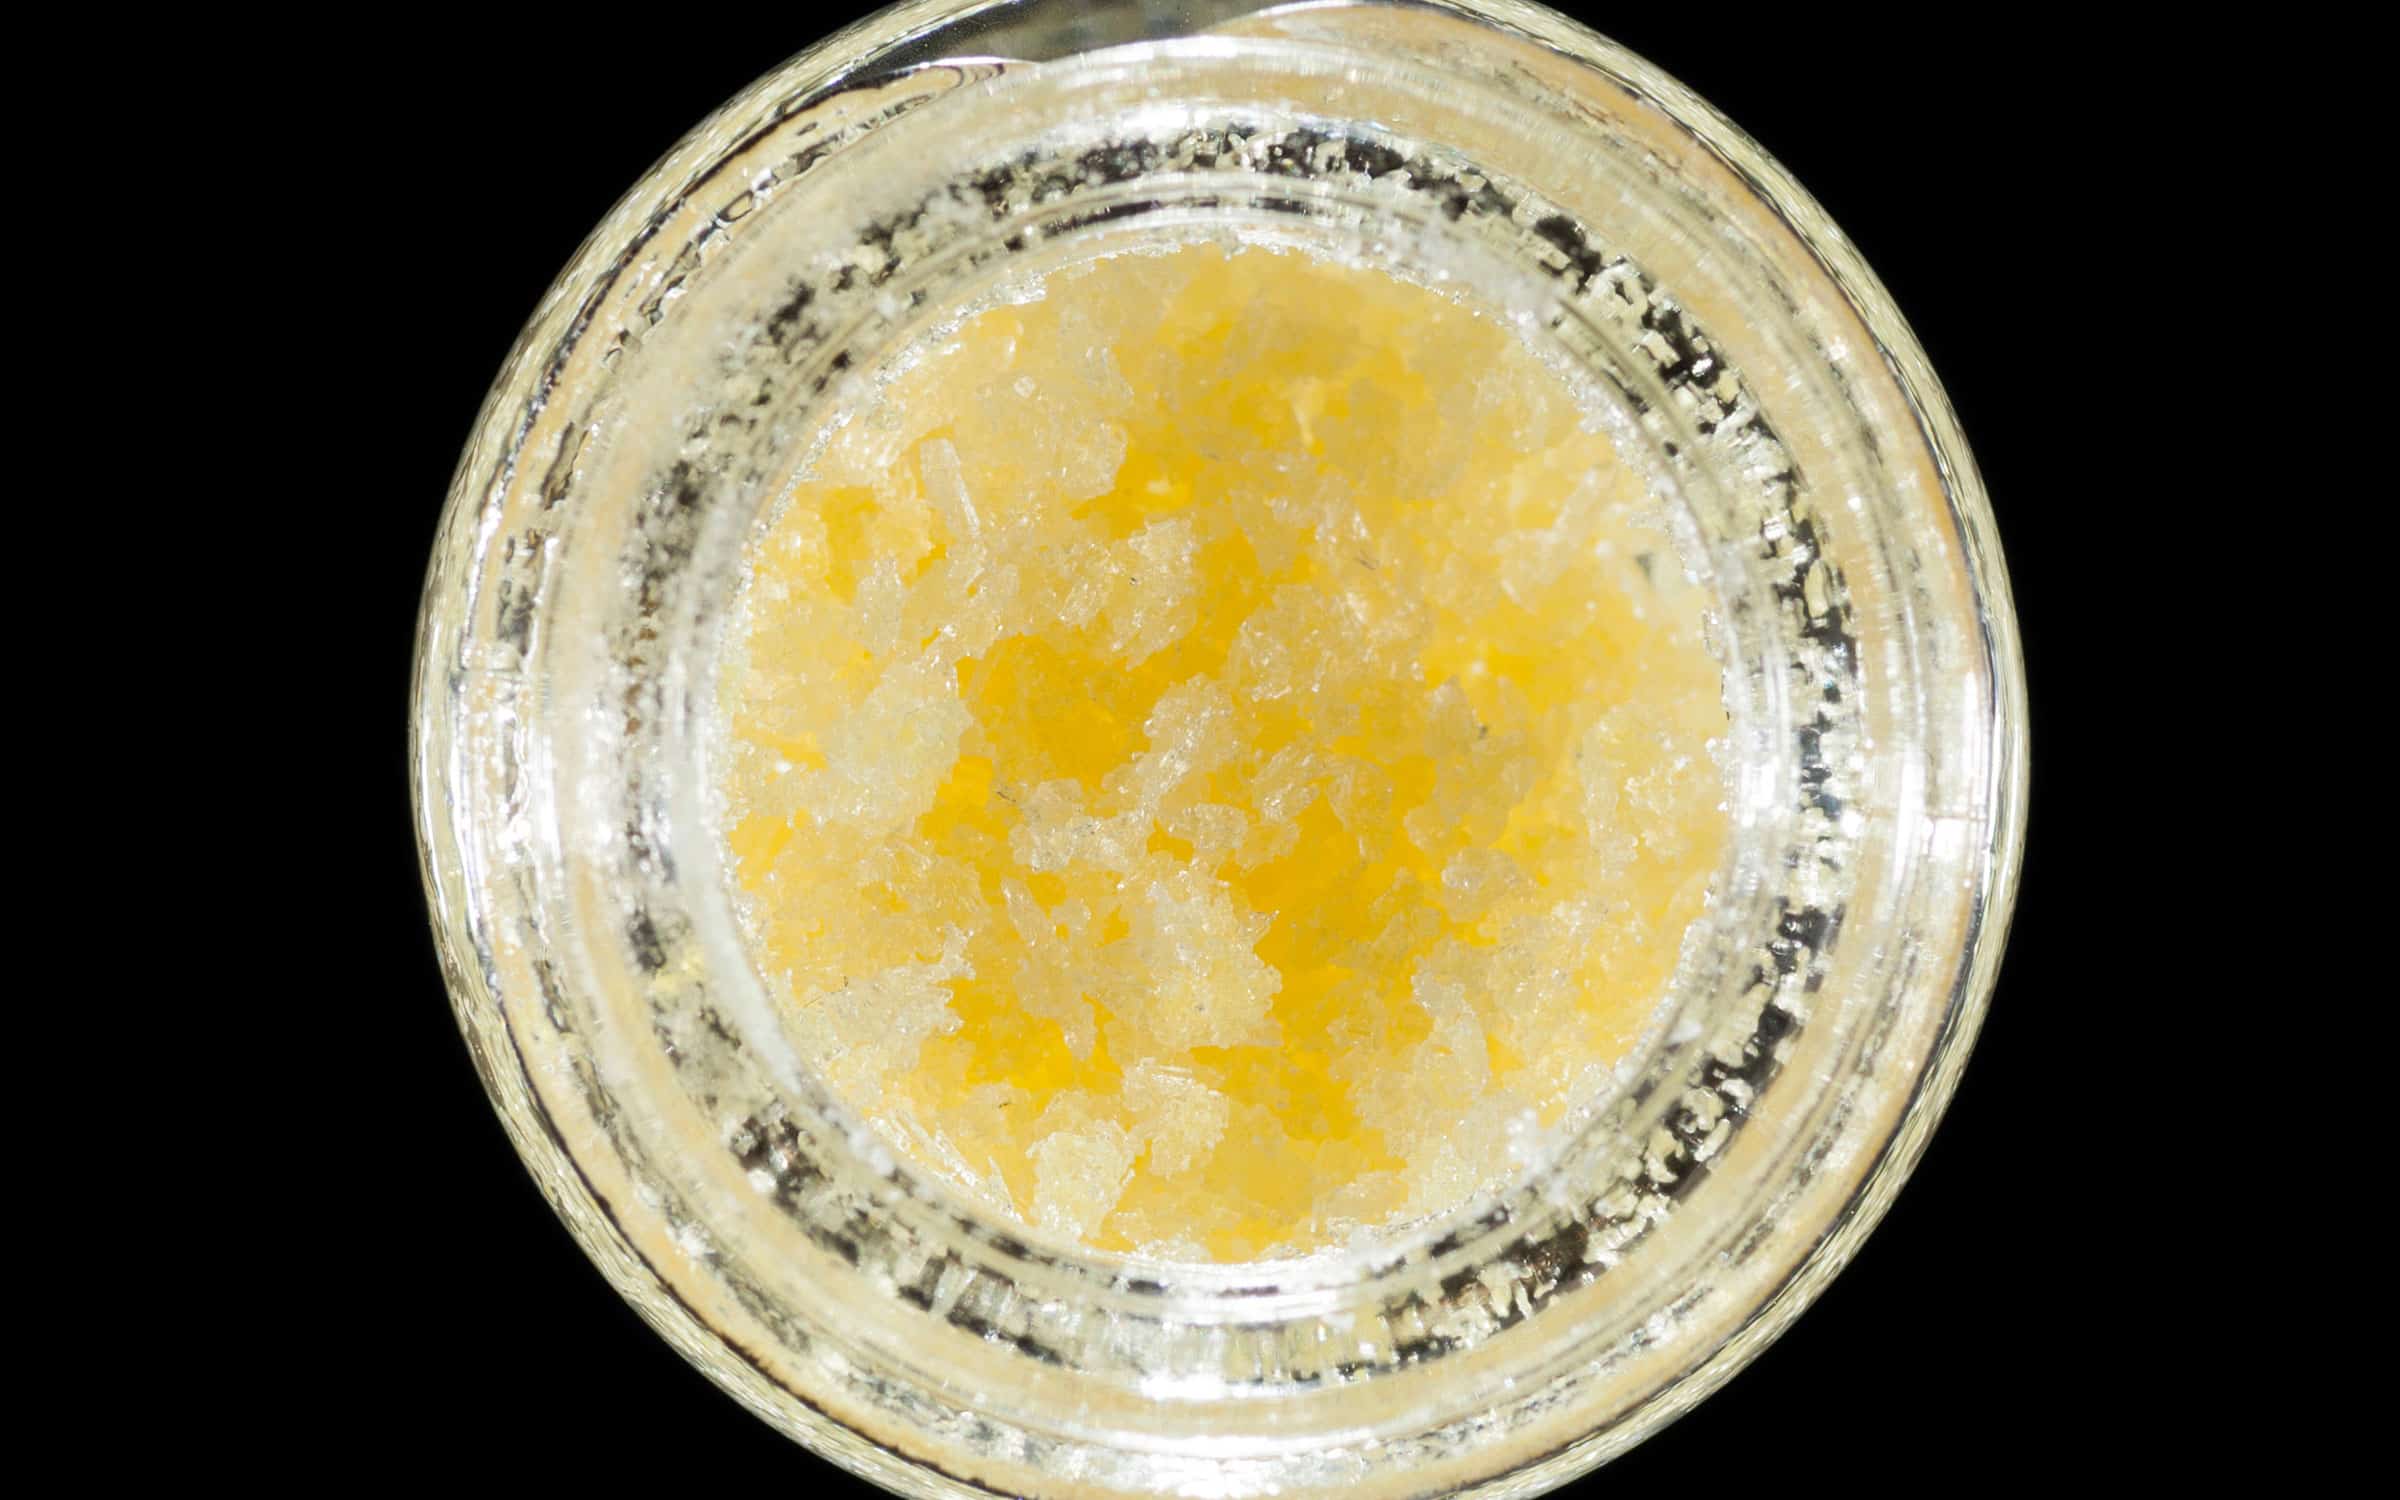 CHEAP CBD CONCENTRATES - Cbd|Concentrates|Products|Concentrate|Hemp|Shatter|Wax|Isolate|Product|Thc|Terpenes|Oil|Effects|Cannabis|Cannabinoids|Spectrum|Plant|Form|Way|Pure|Extract|Powder|Crystals|Dab|Process|Extraction|Flower|People|Benefits|Vape|Body|Experience|Resin|Quality|Waxes|Health|Time|Potency|Amount|Forms|Cbd Concentrates|Cbd Concentrate|Cbd Wax|Cbd Shatter|Cbd Products|Cbd Isolate|Dab Rig|Cannabis Plant|Live Resin|Hemp Plant|Cbd Waxes|Free Shipping|Cbd Oil|Cbd Crystals|Tweedle Farms|Cbd Dabs|Full Spectrum Cbd|Dab Pen|Extraction Process|Daily Basis|Cbd Isolates|Entourage Effect|Scientific Hemp Oil®|Blue Moon Hemp|Cbd Oil Solutions|Pure Cbd Isolate|Pure Cbd|Small Amount|United States|Cbd Flower